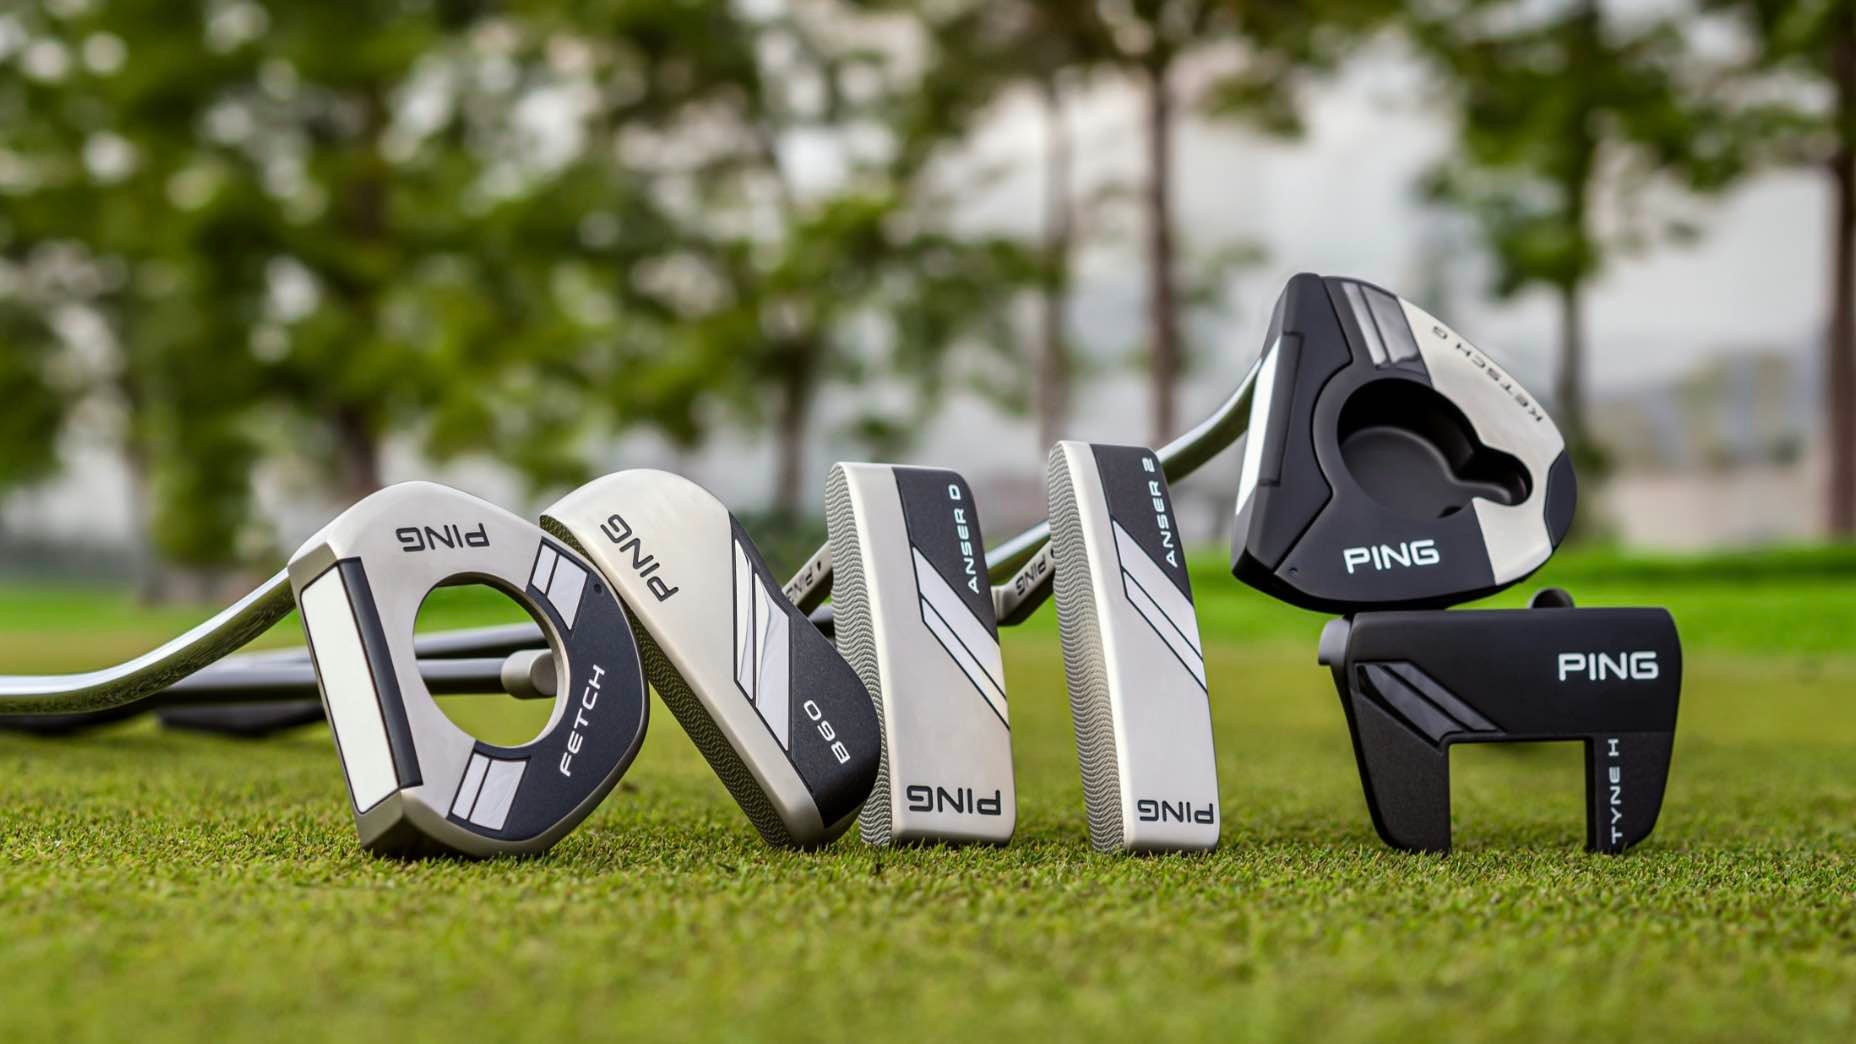 Several putters from the 2024 Ping putter line arranged on a golf course